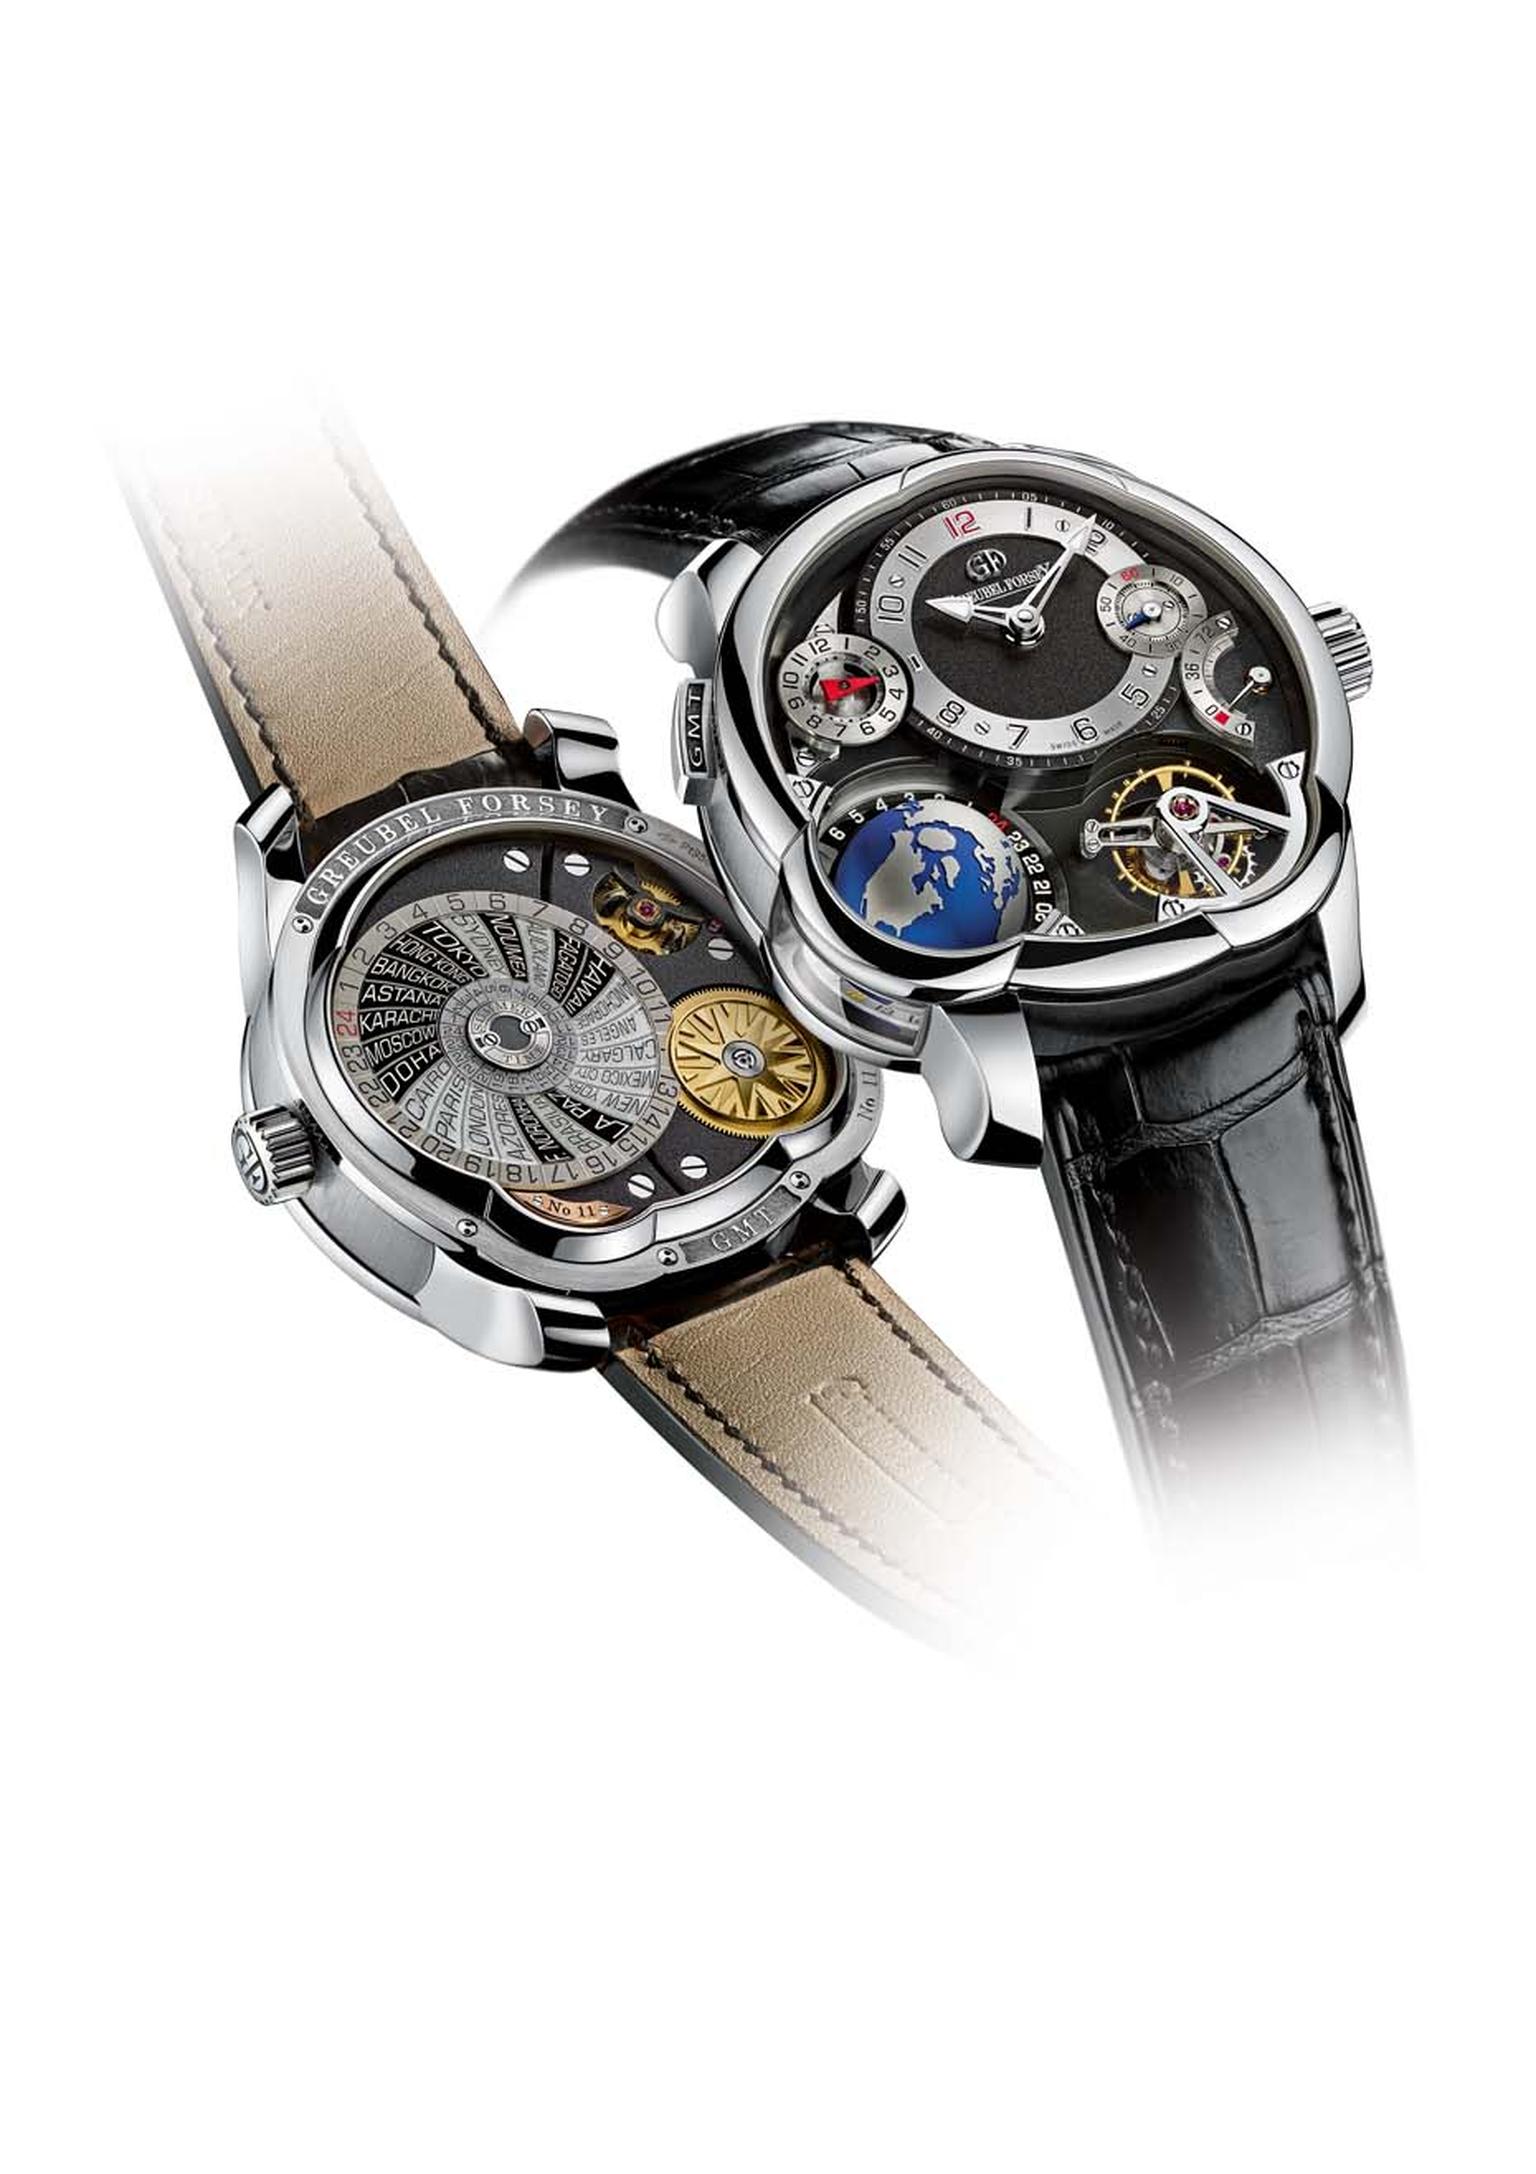 Greubel Forsey will be launching its superlative 2011 GMT model in a new platinum case at the SIHH 2014 in Geneva.